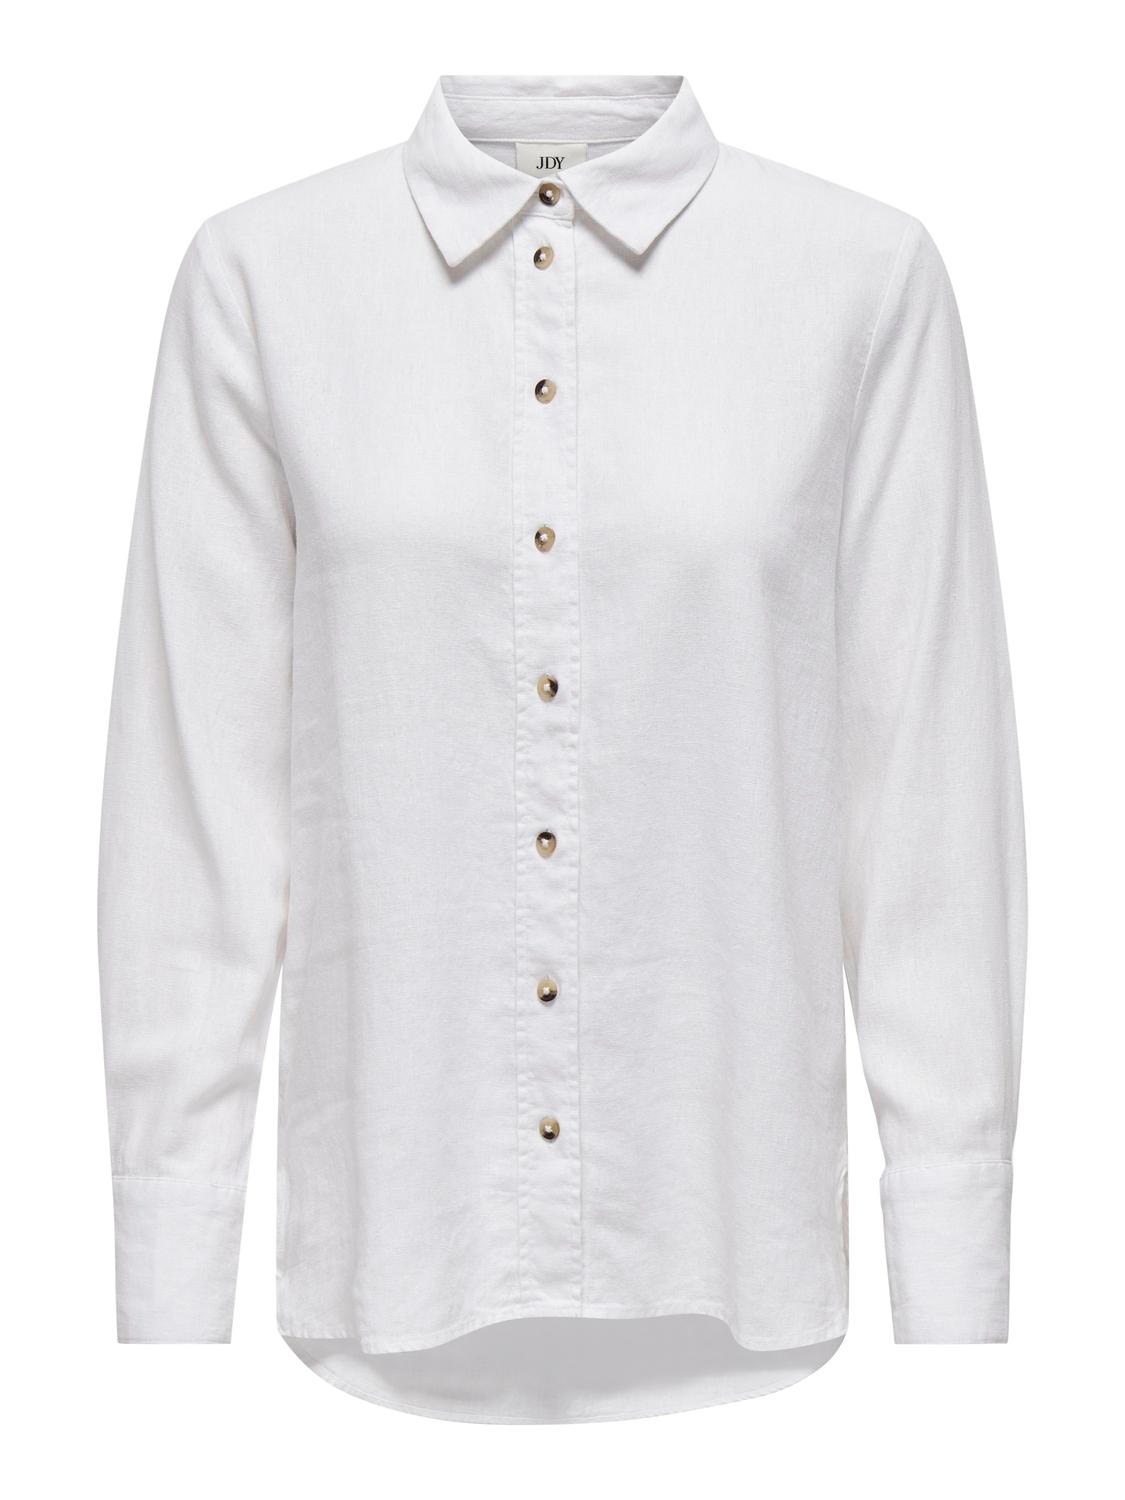 ONLY Loose Fit Shirt collar Buttoned cuffs Volume sleeves Shirt -Bright White - 15318364